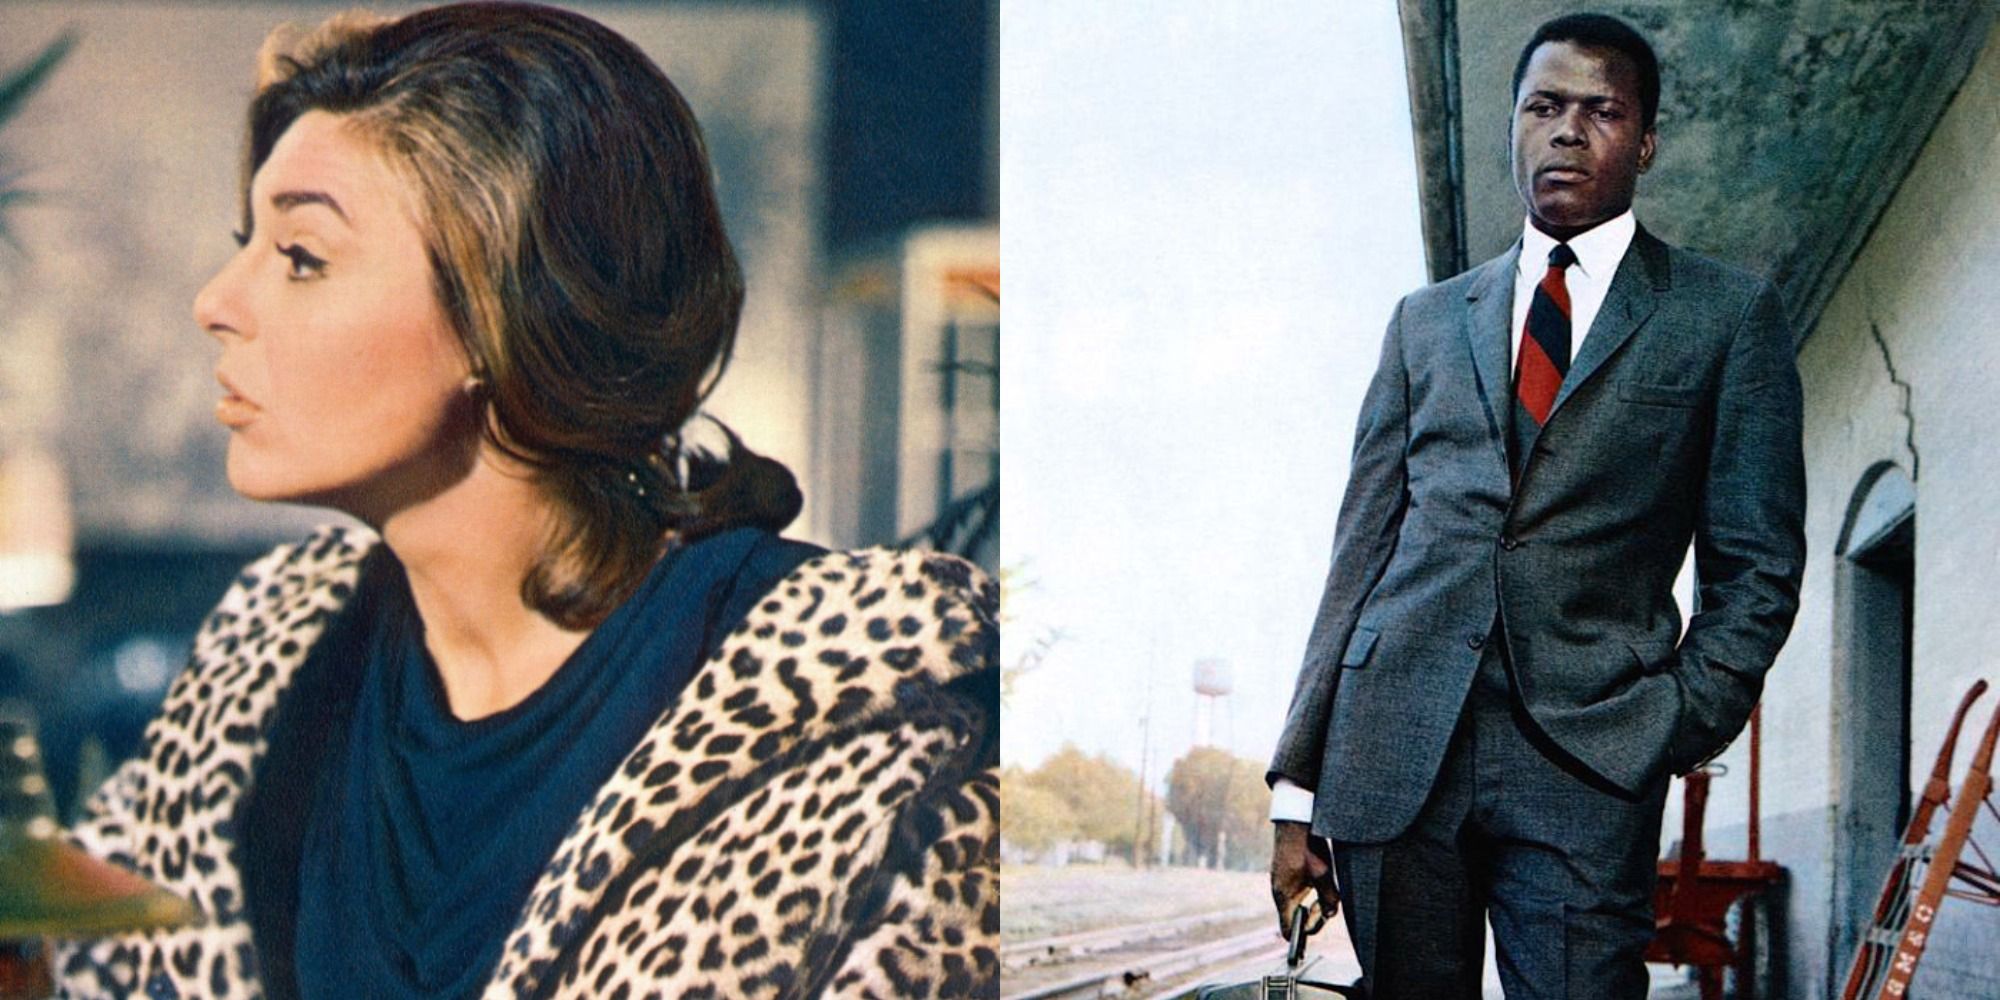 Two side by side images of Mrs. Robinson from The Graduate and Mr Tibb from In The Heat of the Night